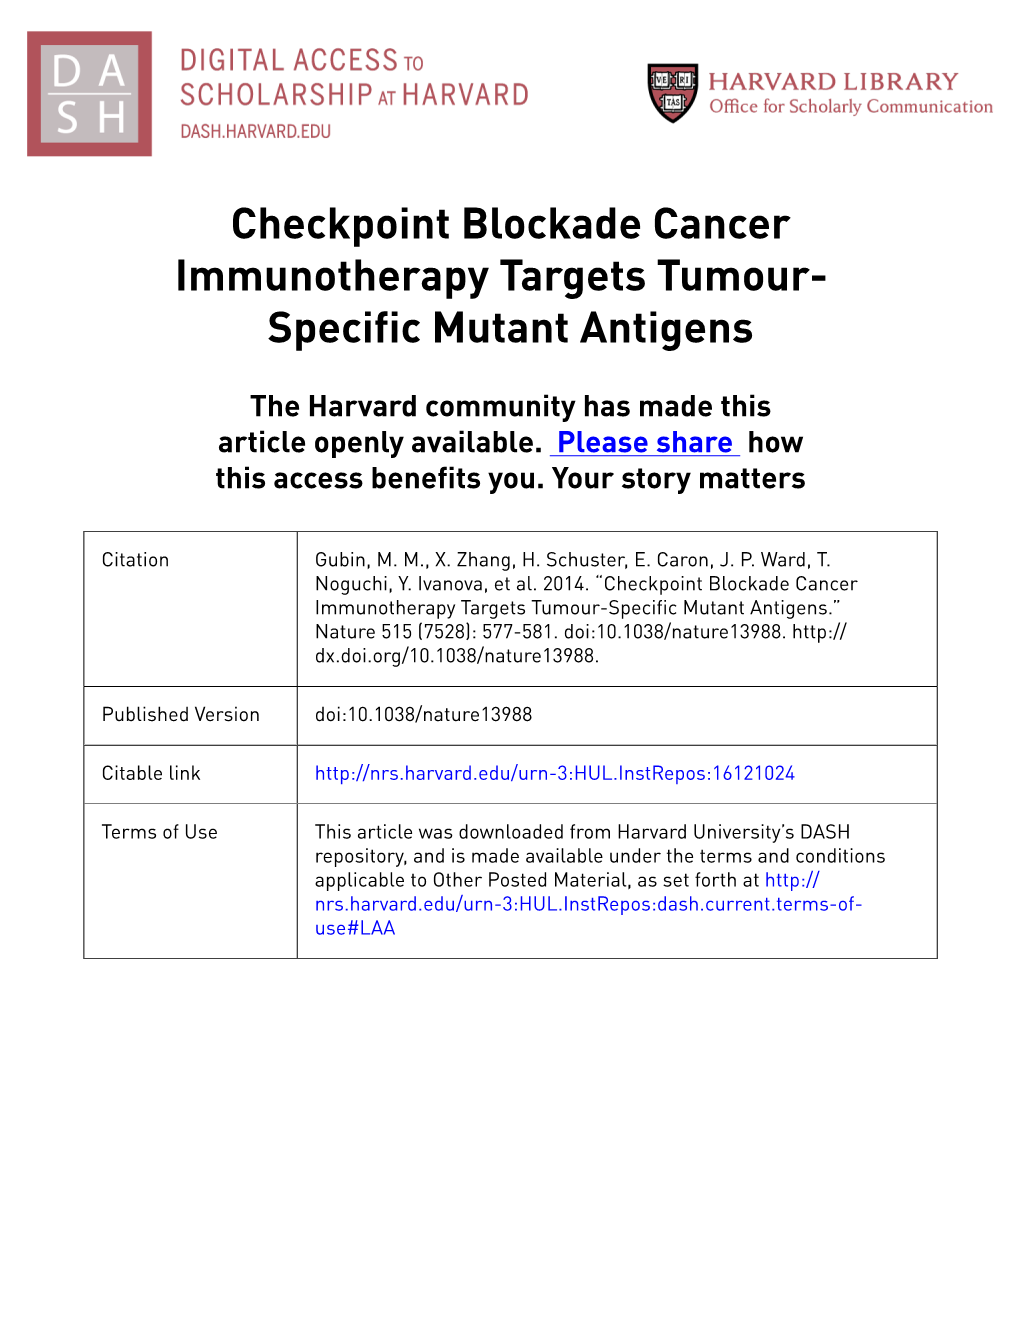 Checkpoint Blockade Cancer Immunotherapy Targets Tumour- Specific Mutant Antigens